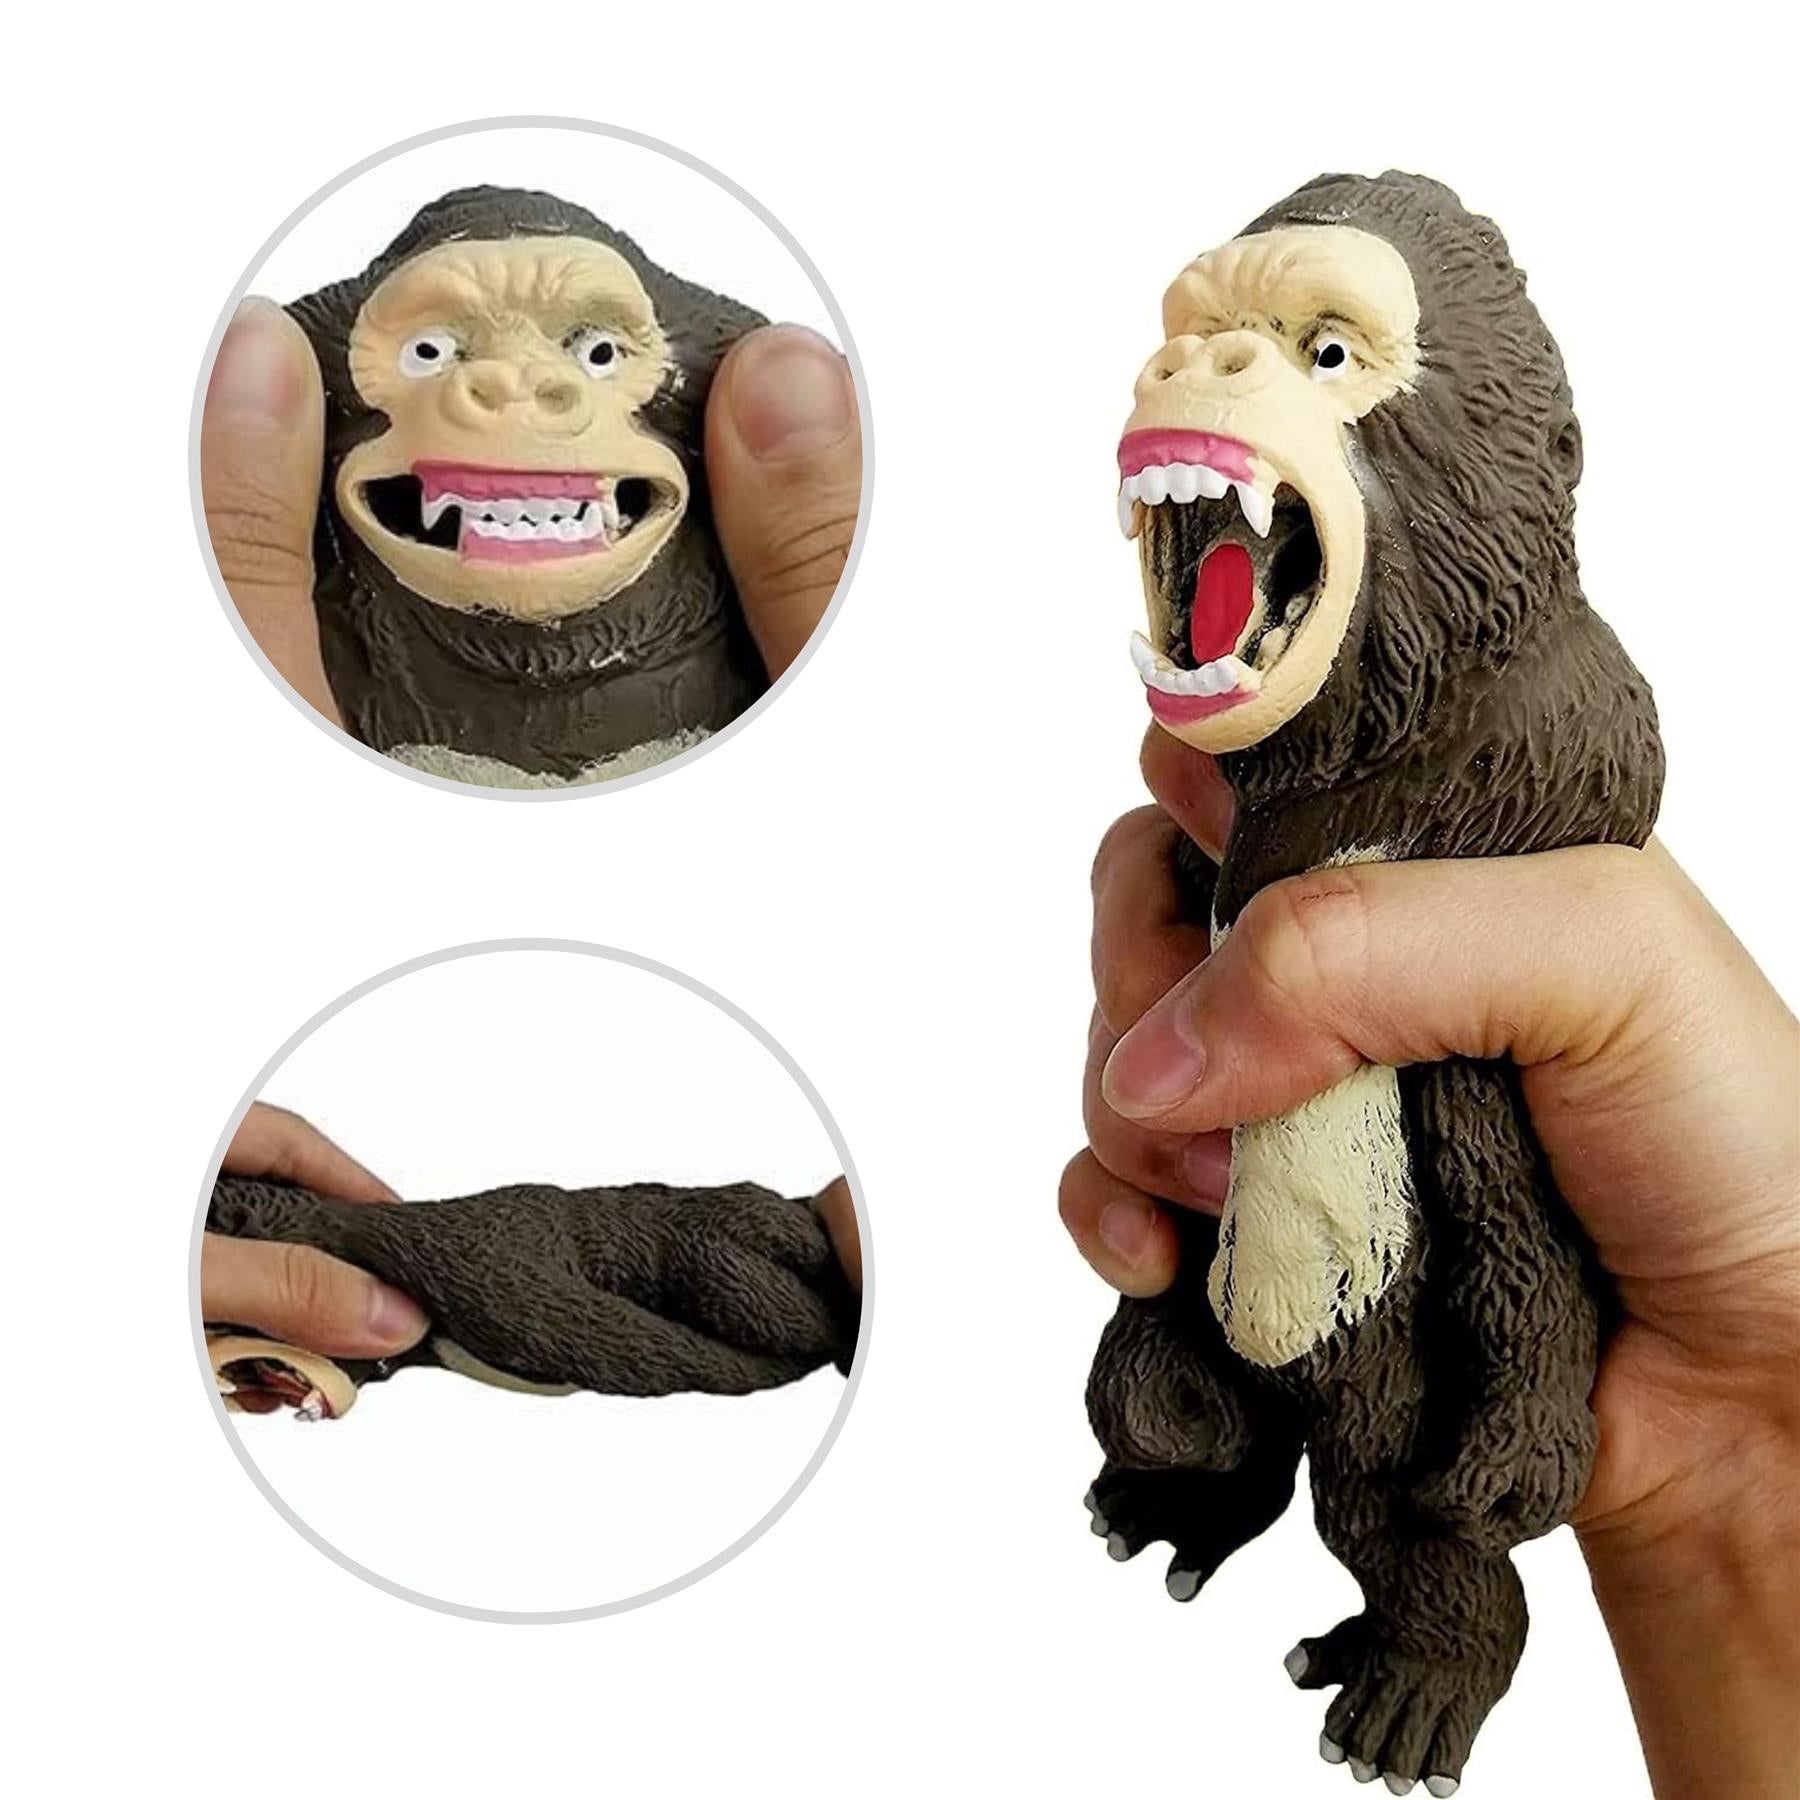 The Magic Toy Shop Stretchy Squeeze Toy Stretchy Gorilla Toy